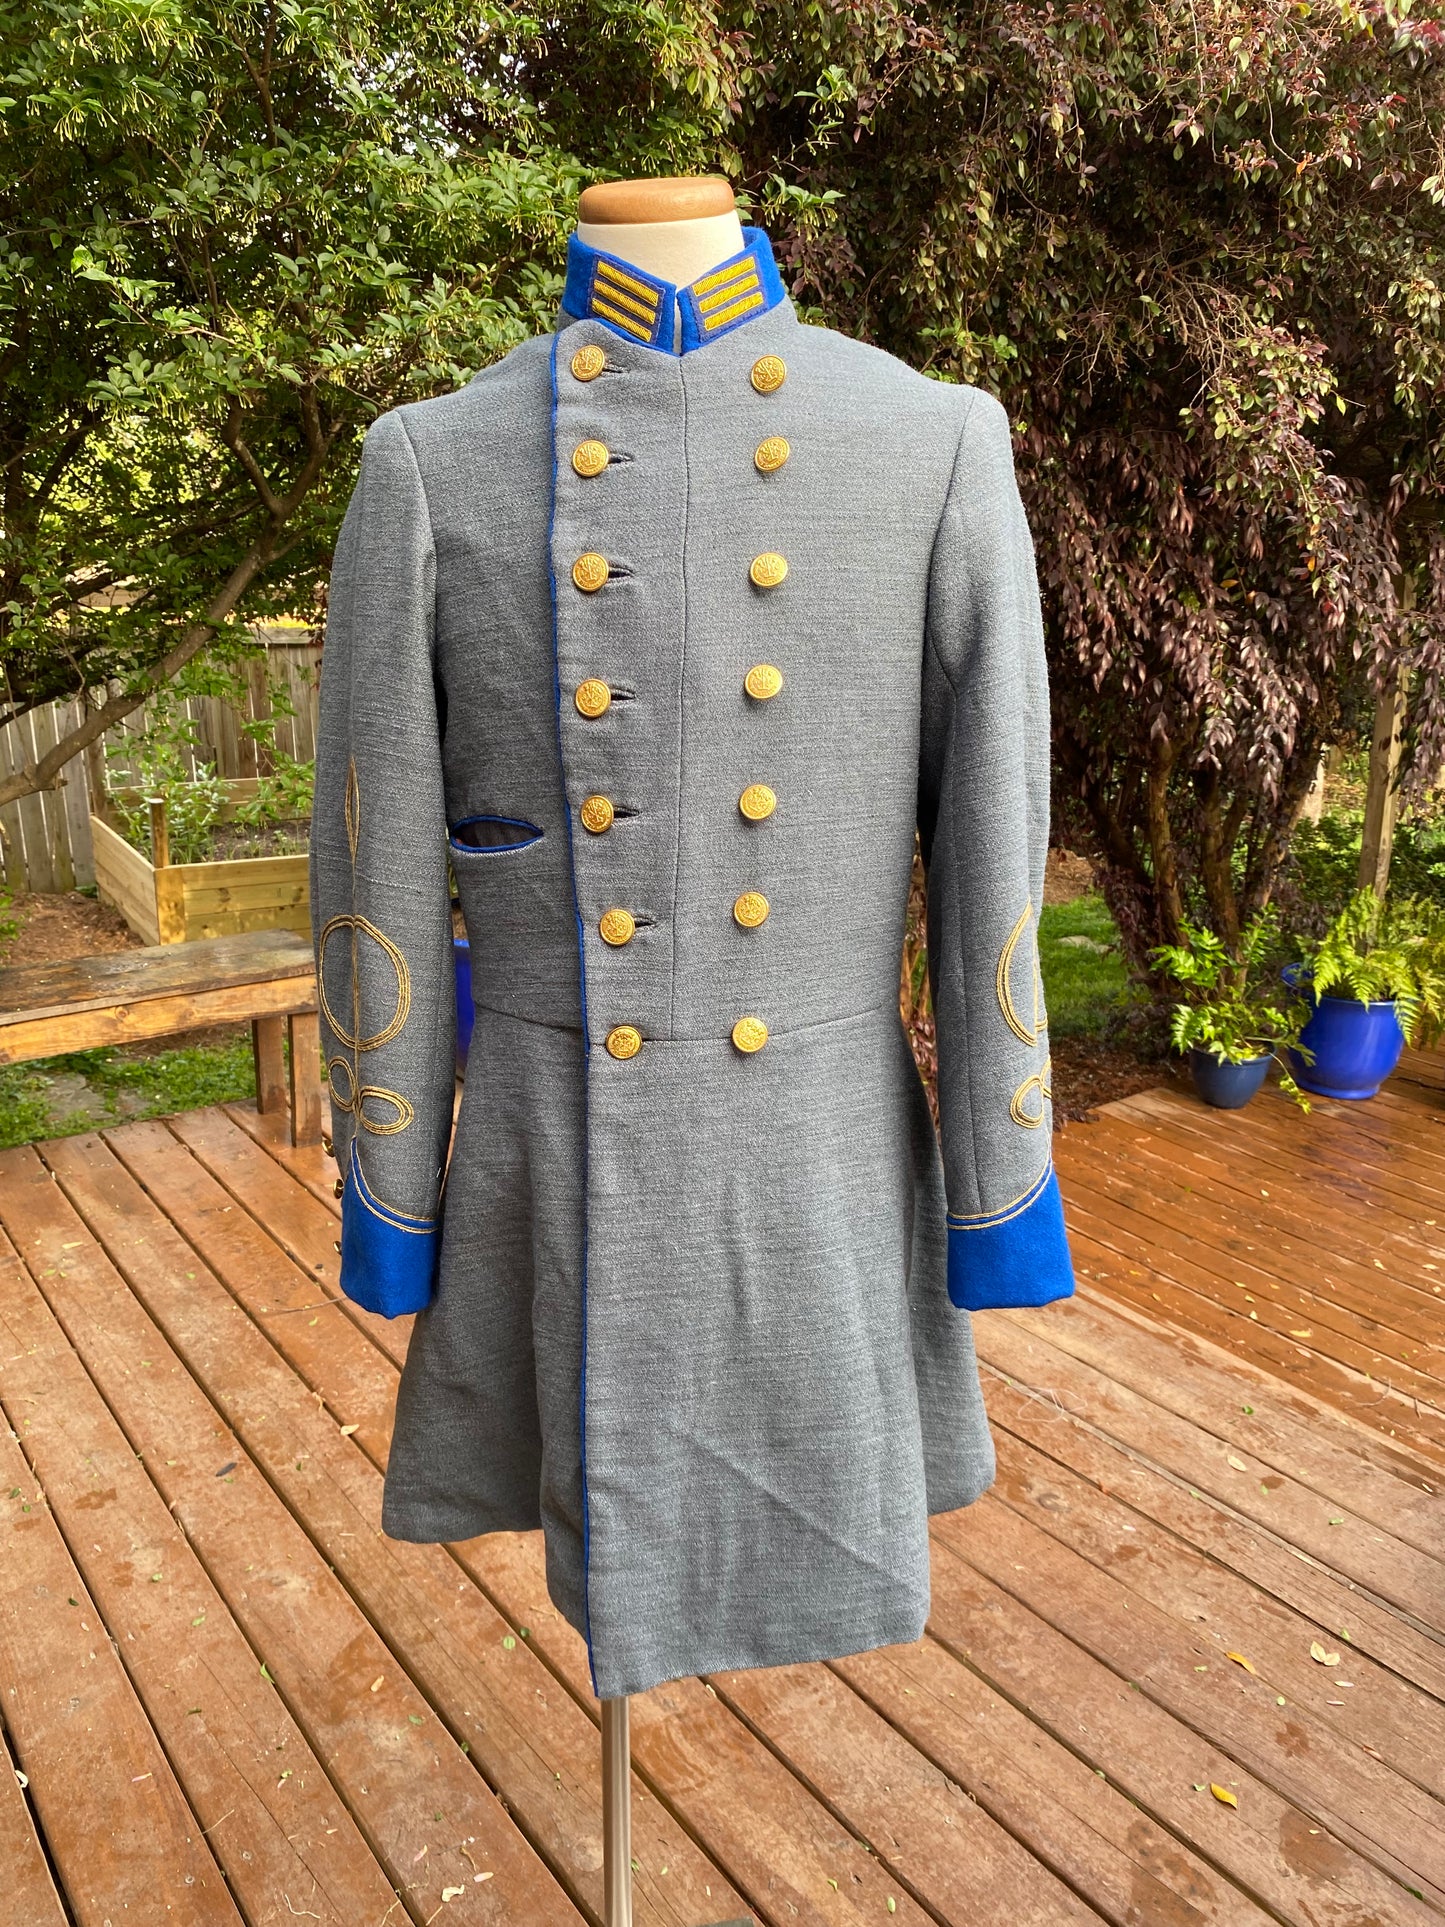 Confederate Officer Frock Coat - Trimmed Jean Company Grade